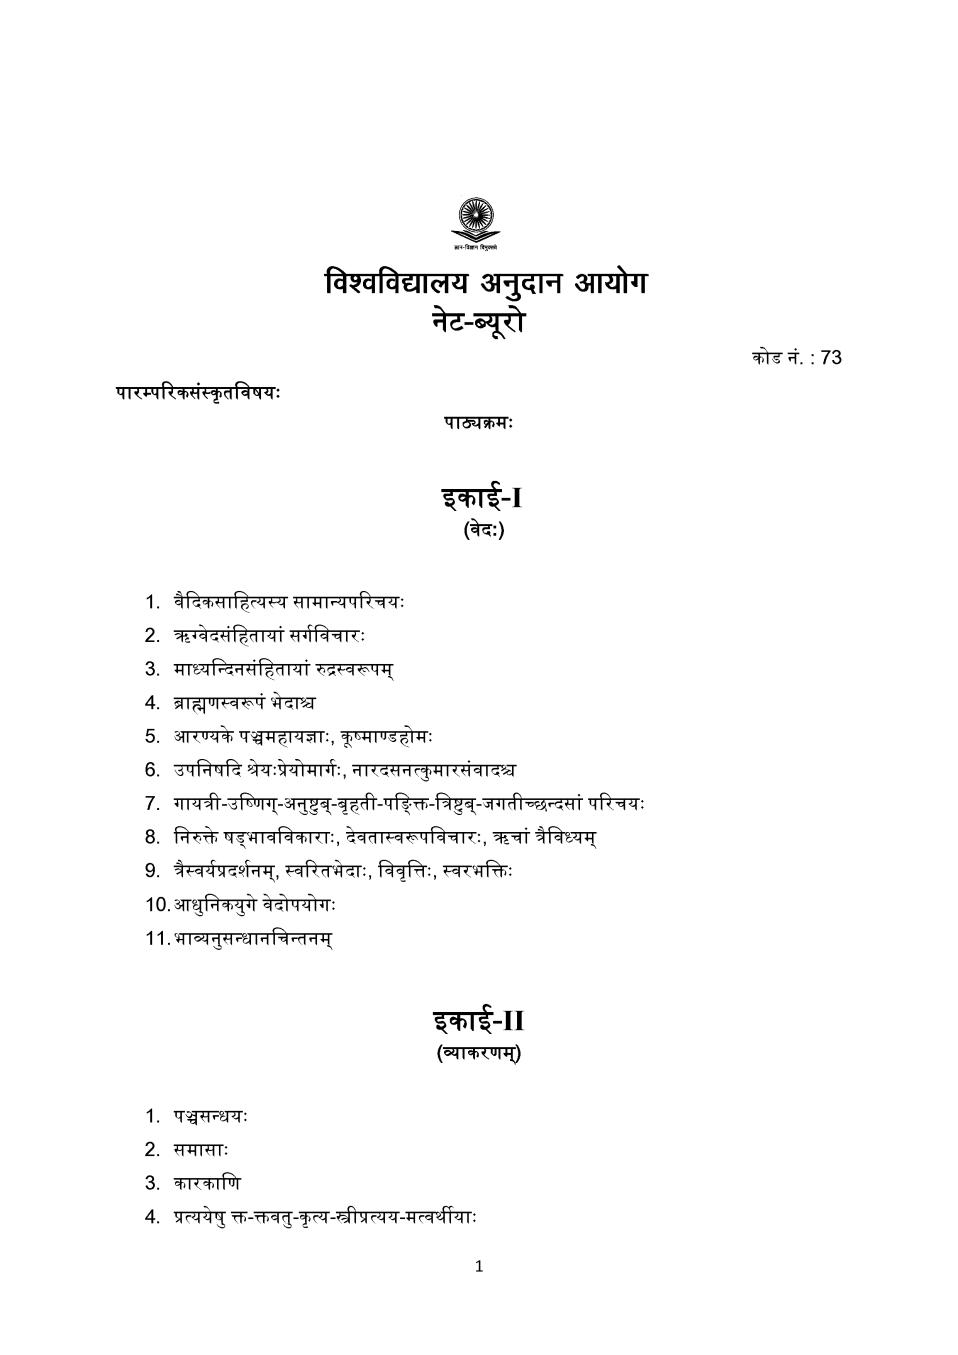 UGC NET Syllabus for Sanskrit Traditional Subjects 2020 in Hindi - Page 1